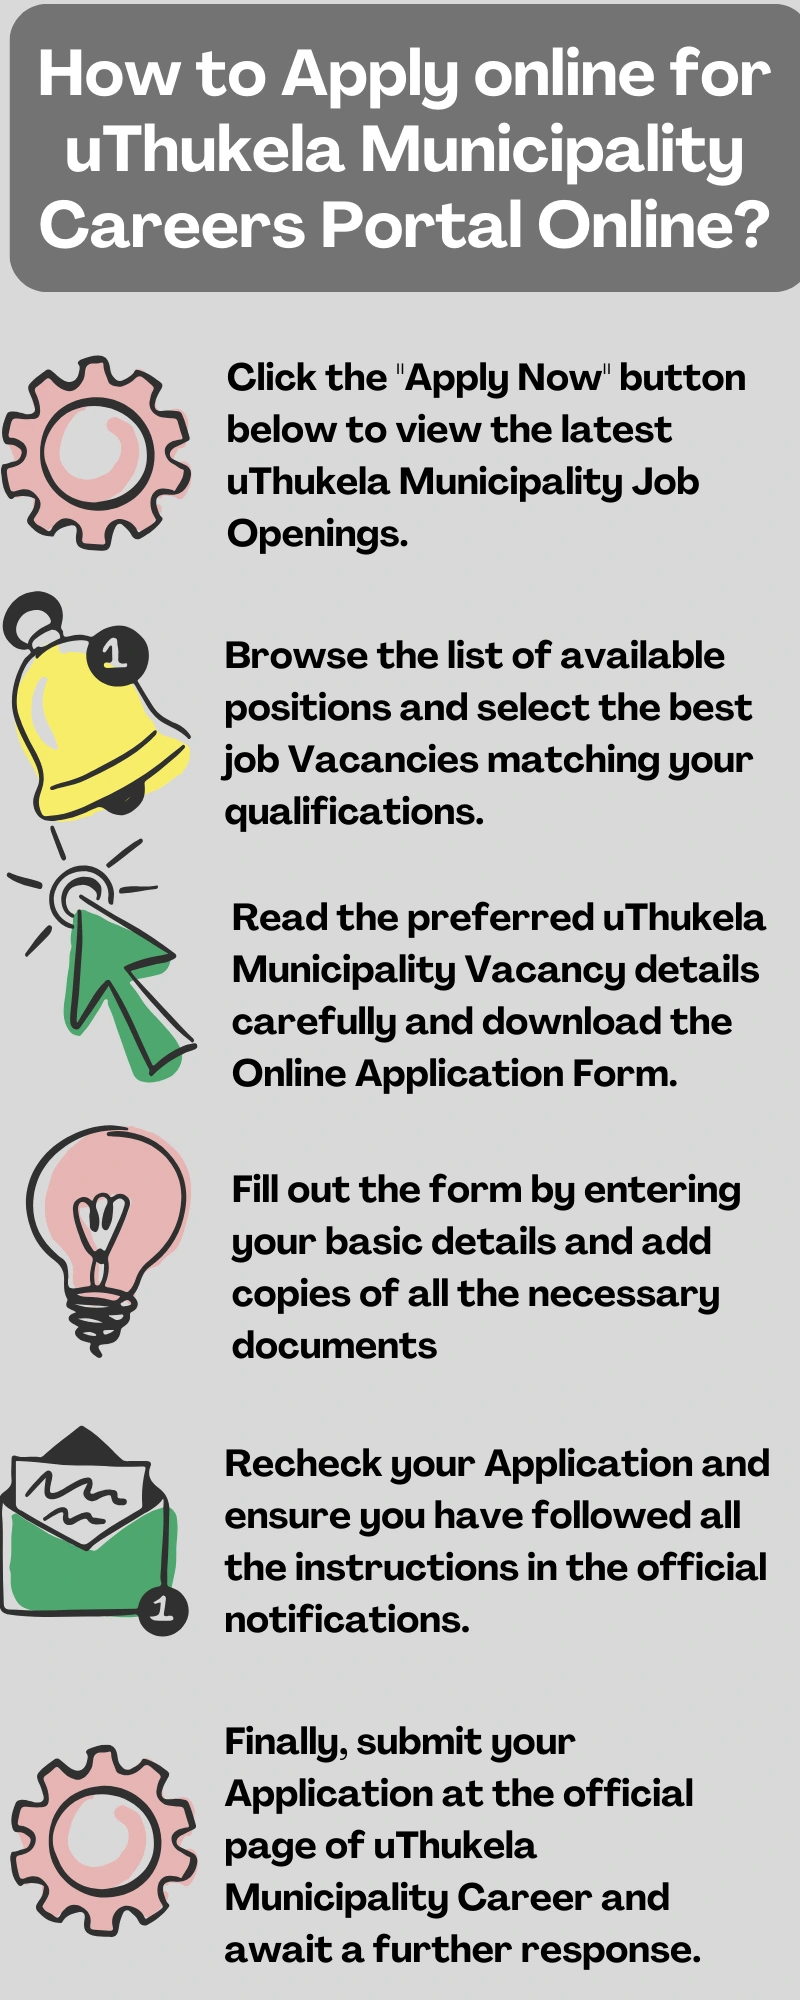 How to Apply online for uThukela Municipality Careers Portal Online?